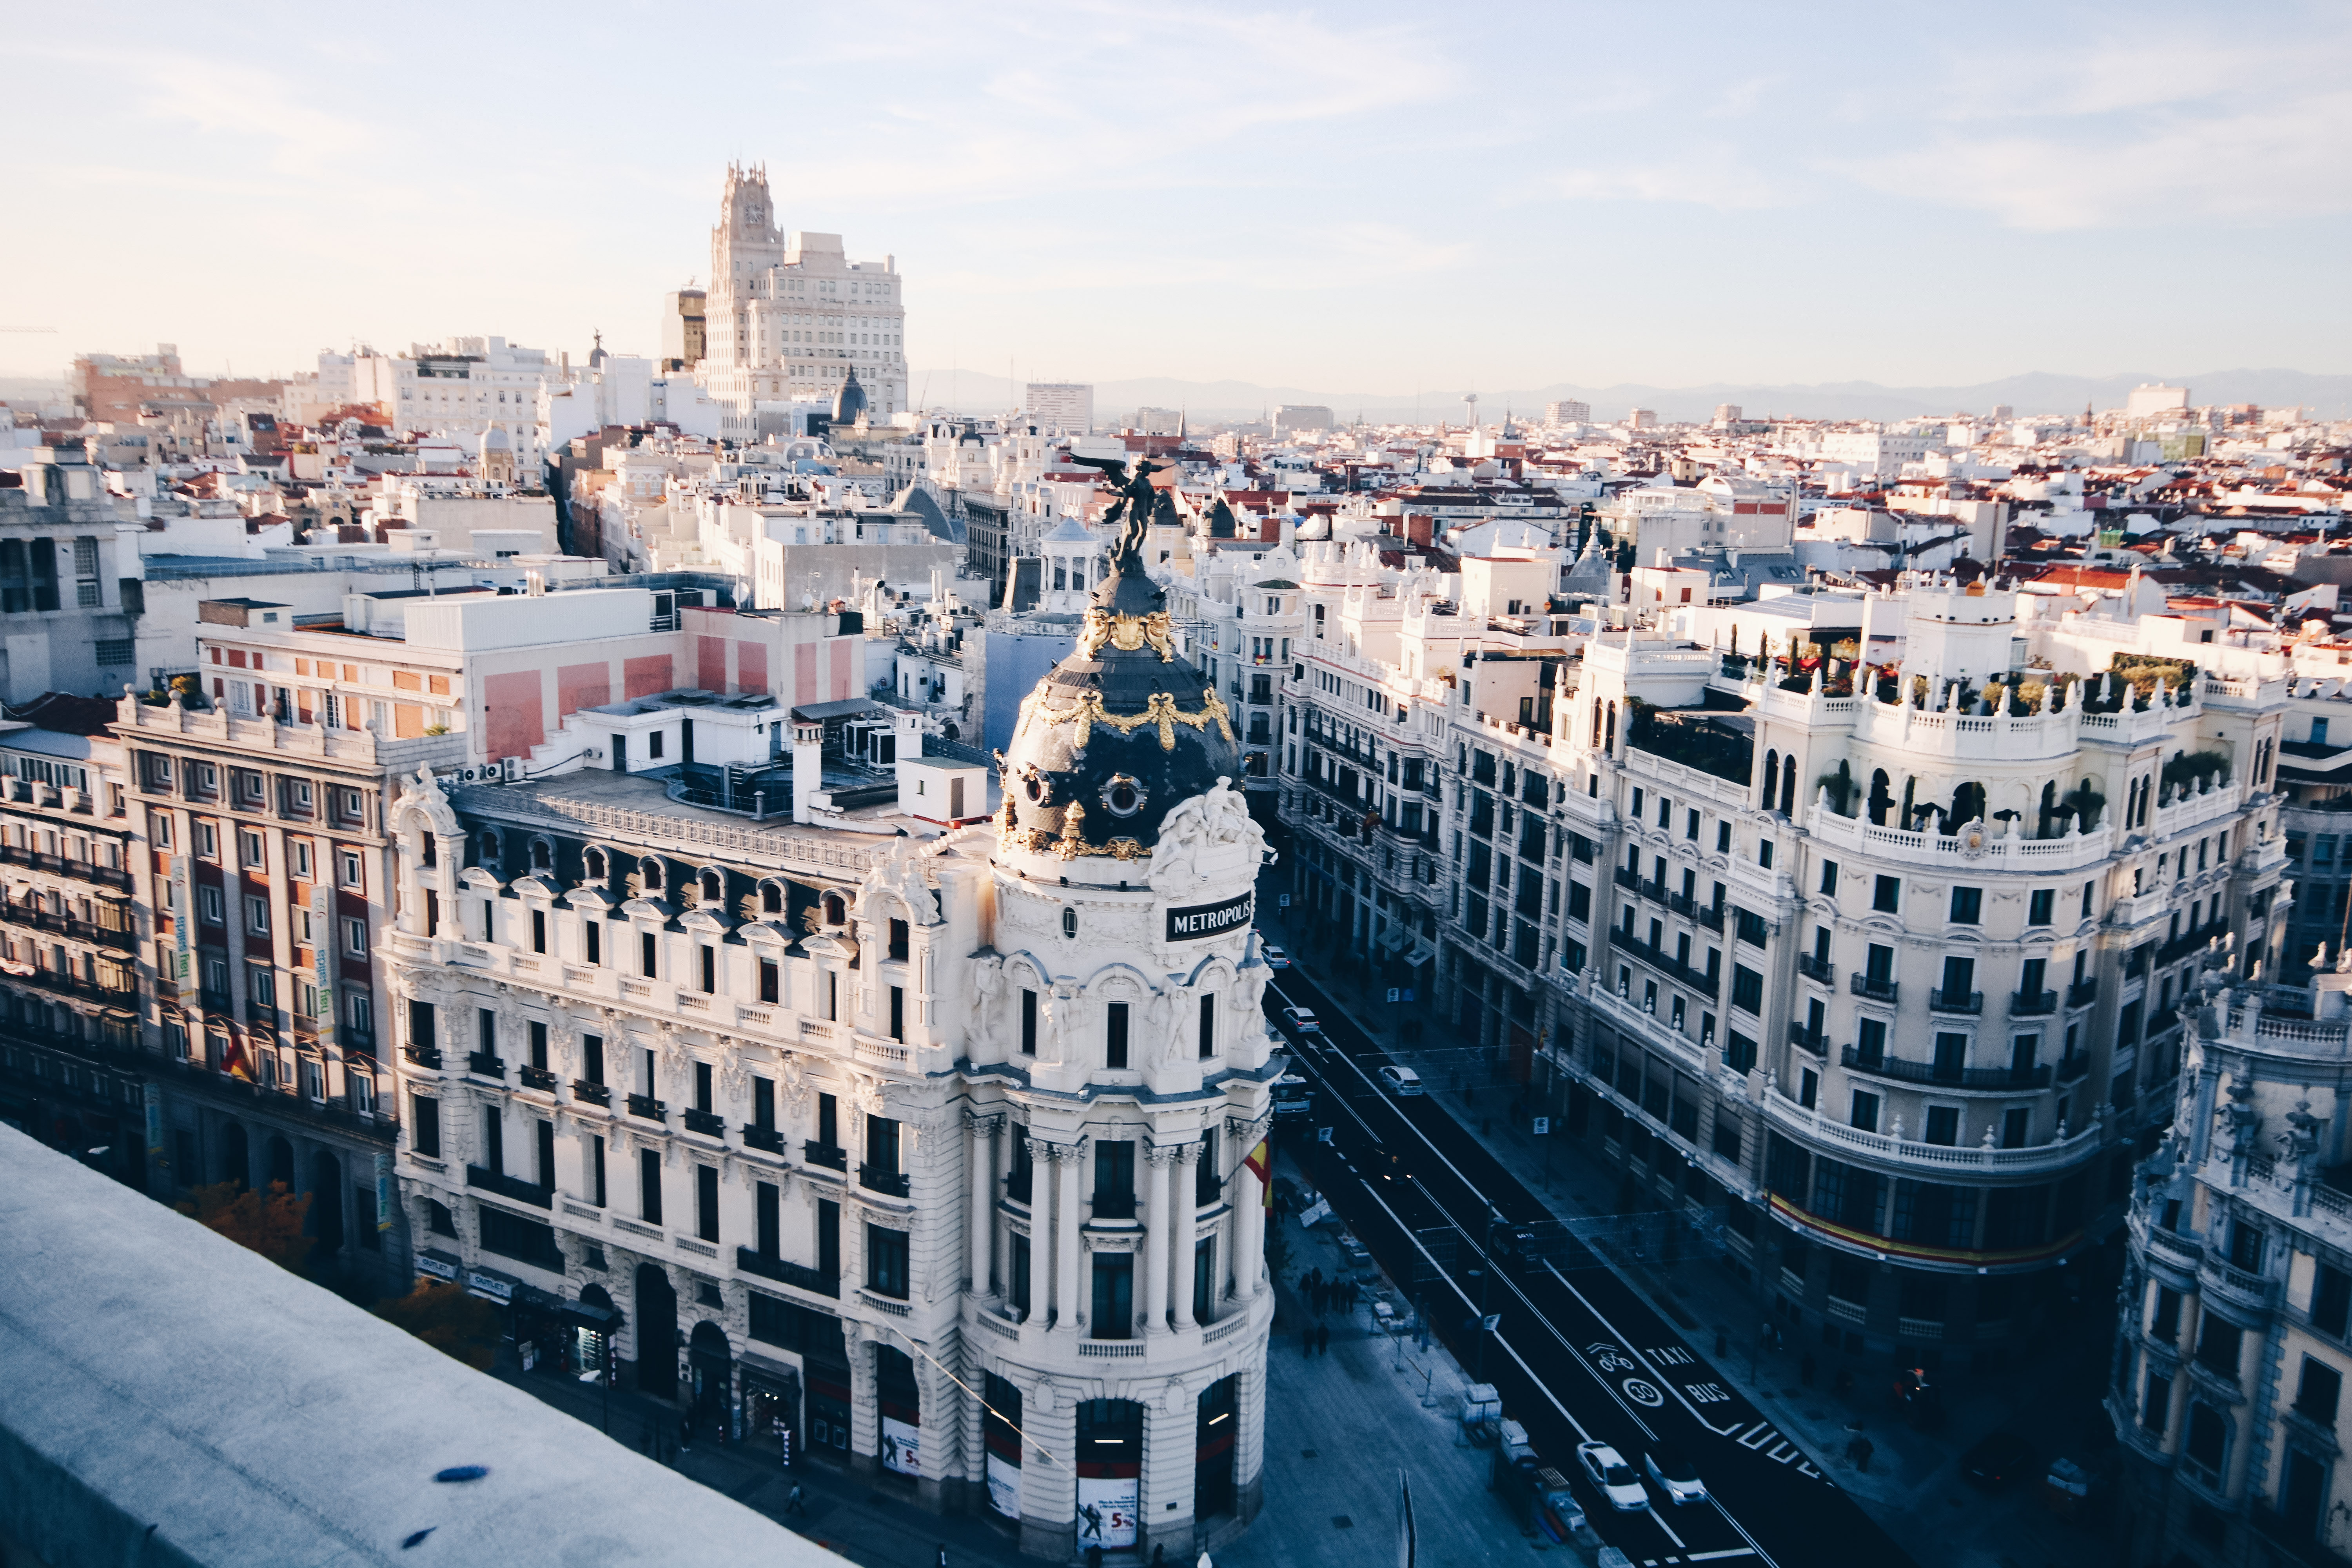 Madrid on a budget: Is Madrid expensive to visit?